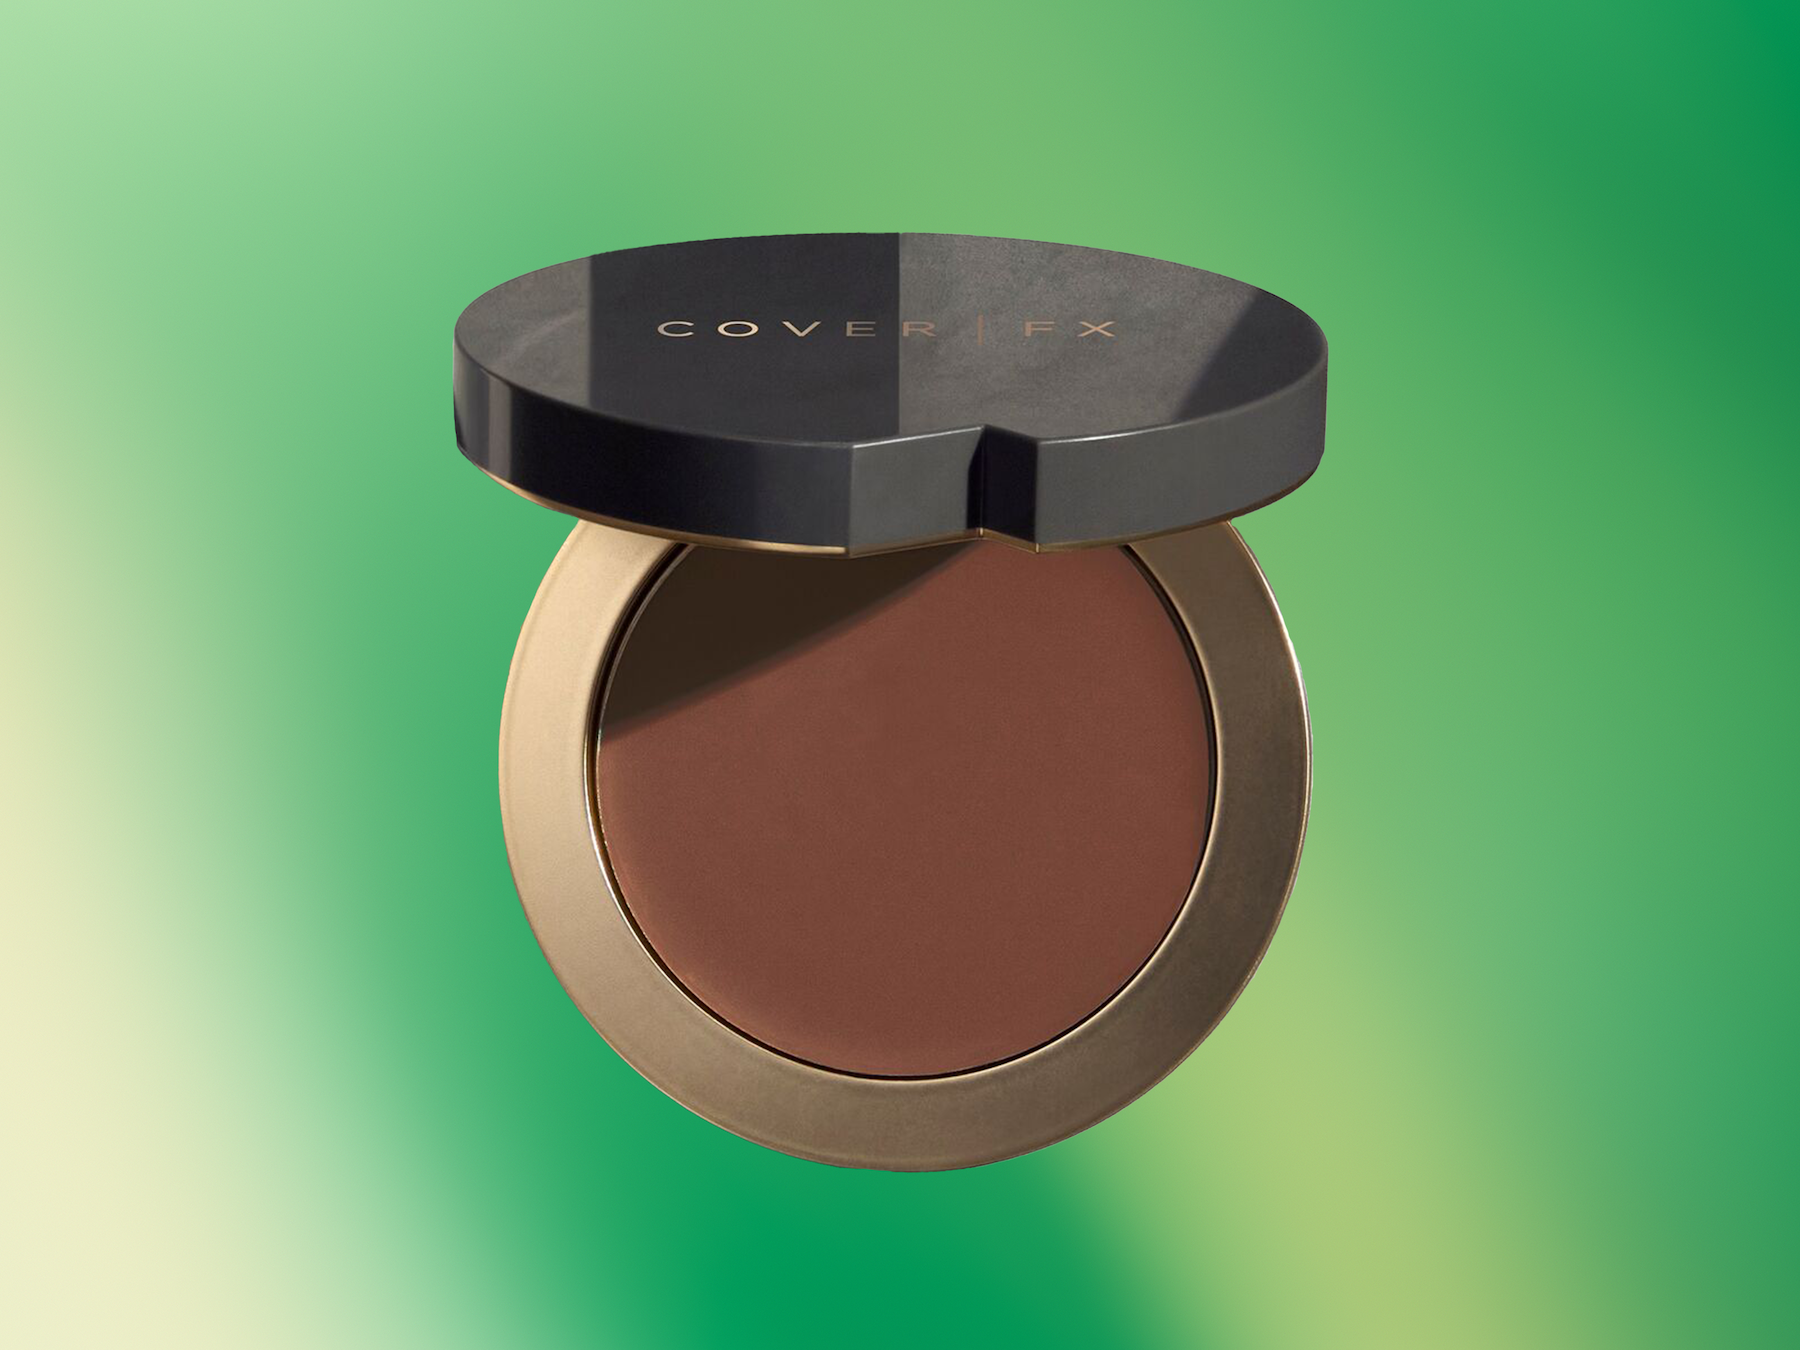 Product Of The Week: CoverFX Total Cover Cream Foundation